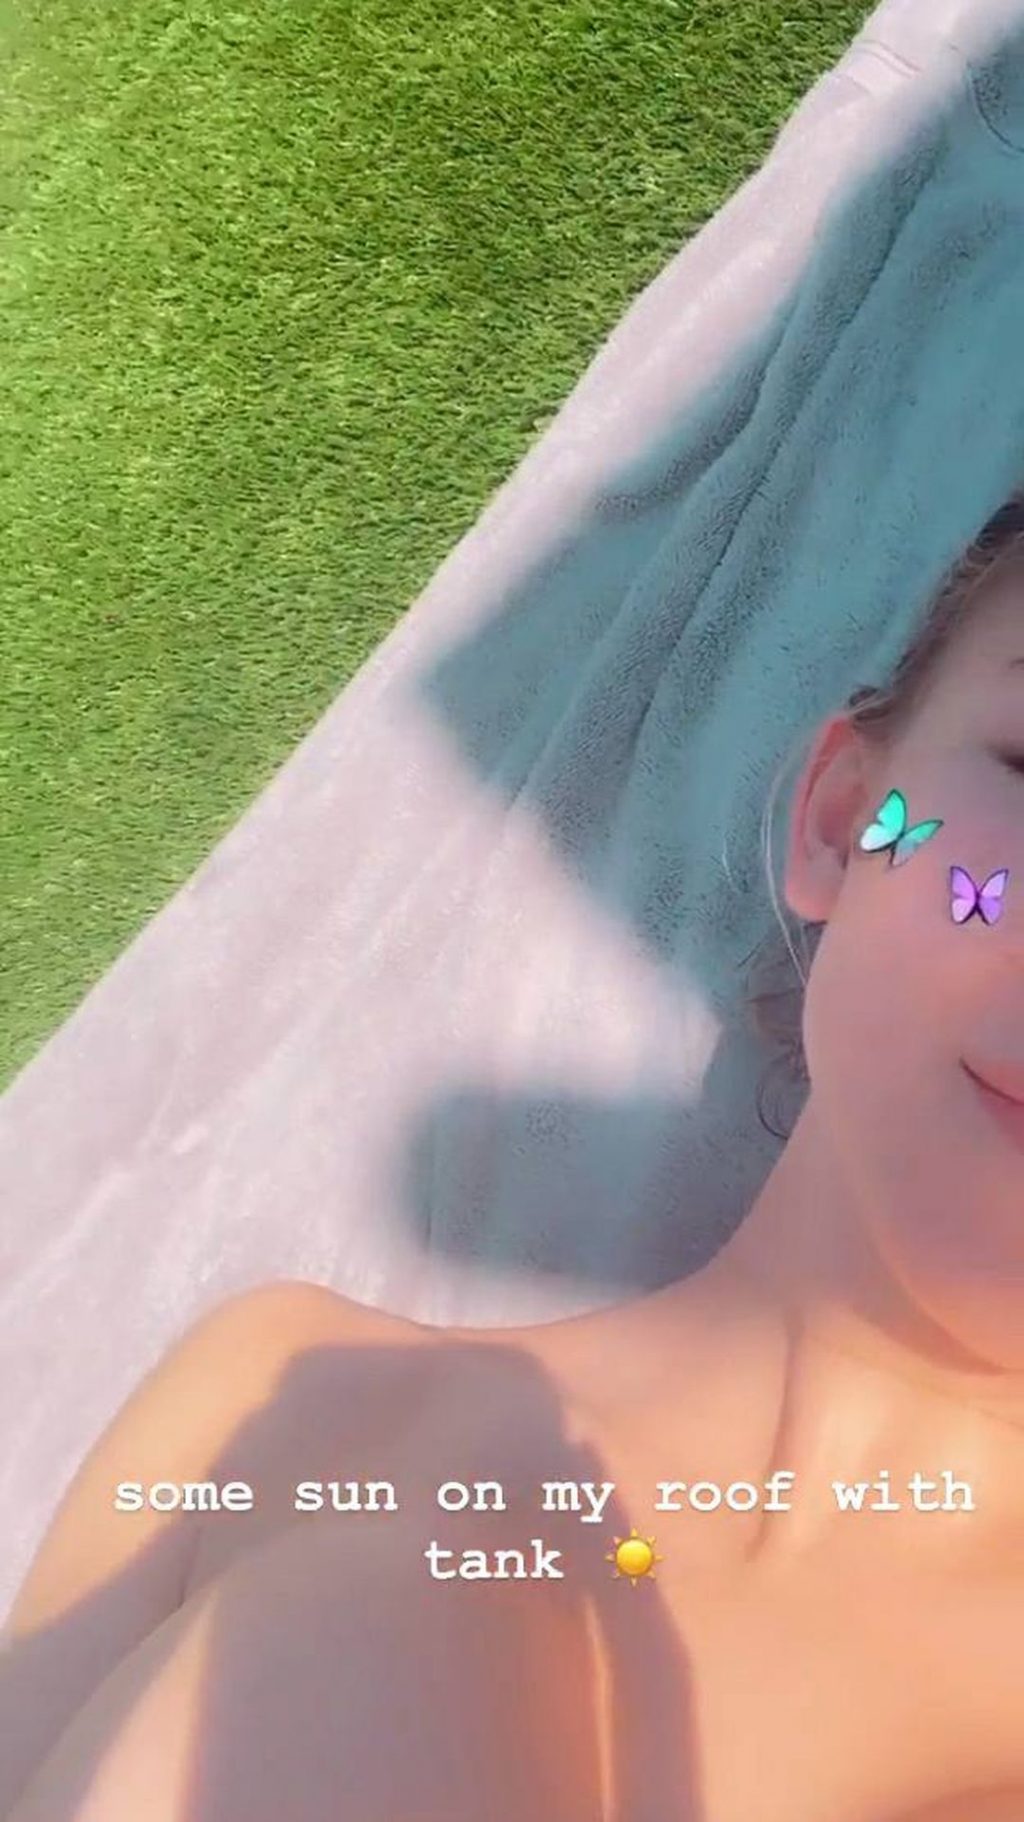 Sydney Sweeney Gives a Good Mood and Her Boobs (4 Pics + GIF)